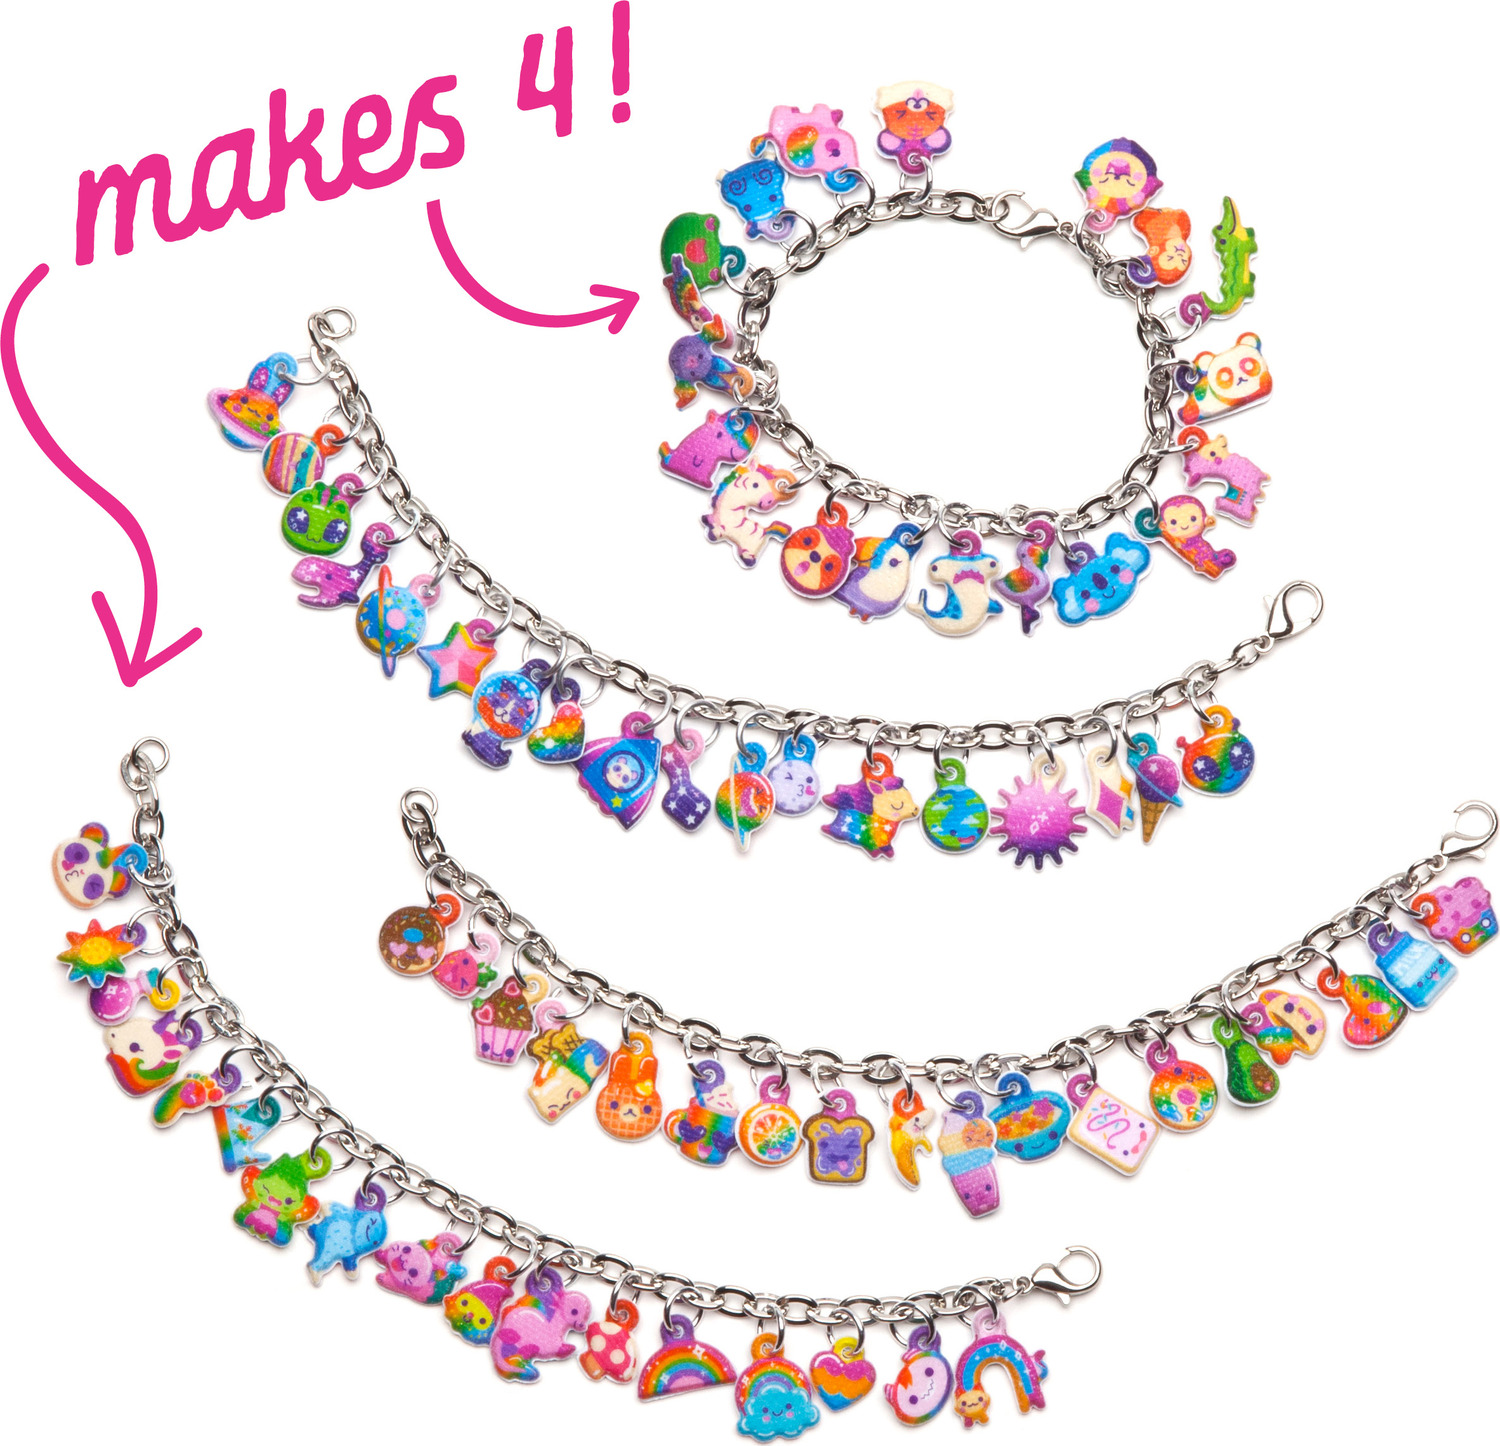 Craft Tastic Diy Sparkle Charm Bracelets The Toy Chest At The Nutshell